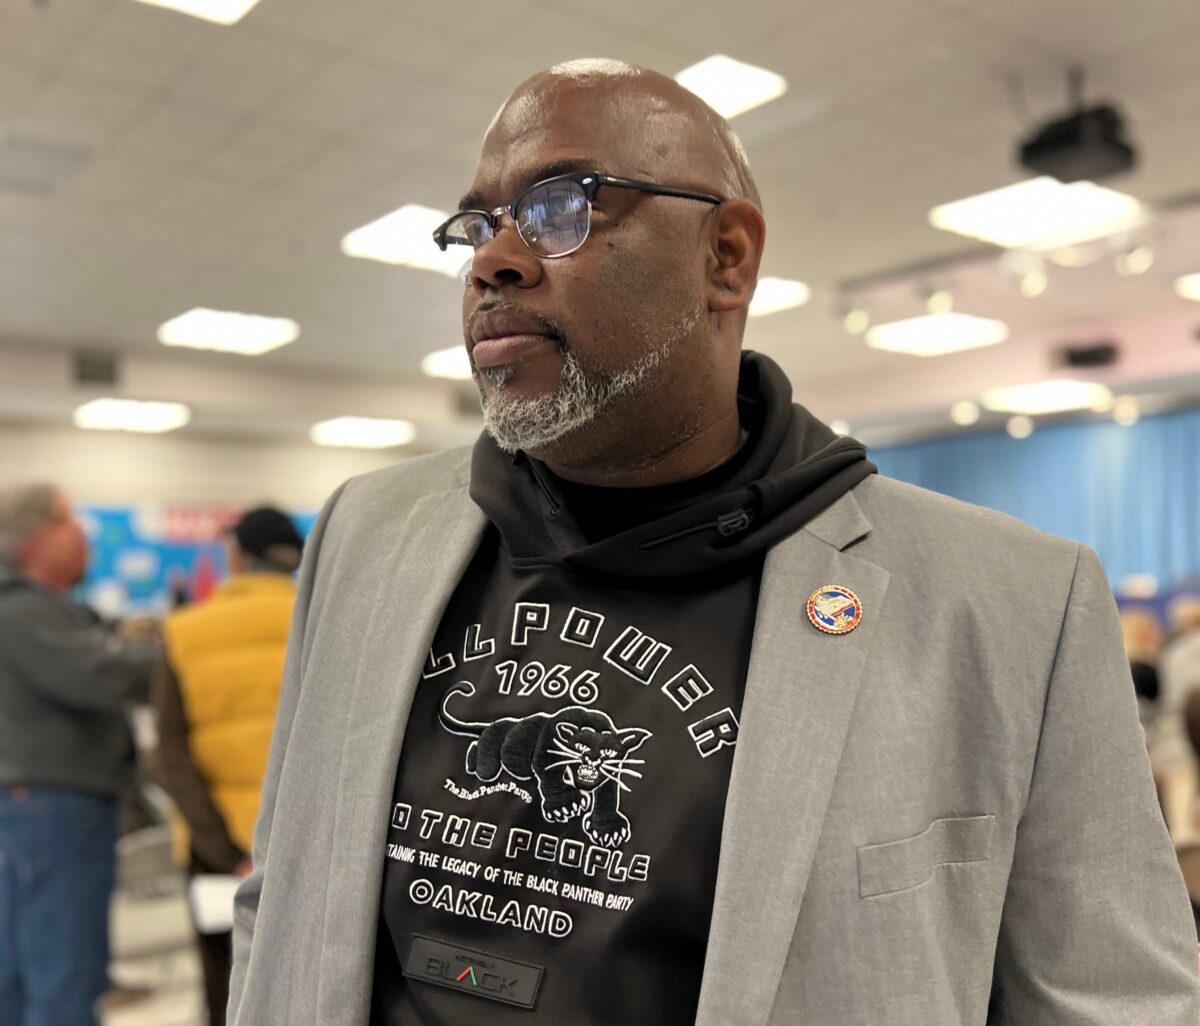 San Jacinto City Councilor Brian Hawkins attends a special meeting to discuss critical race theory with the Temecula Valley Unified School District Board and invited experts in Temecula, Calif., on March 22, 2023. (Brad Jones/The Epoch Times)